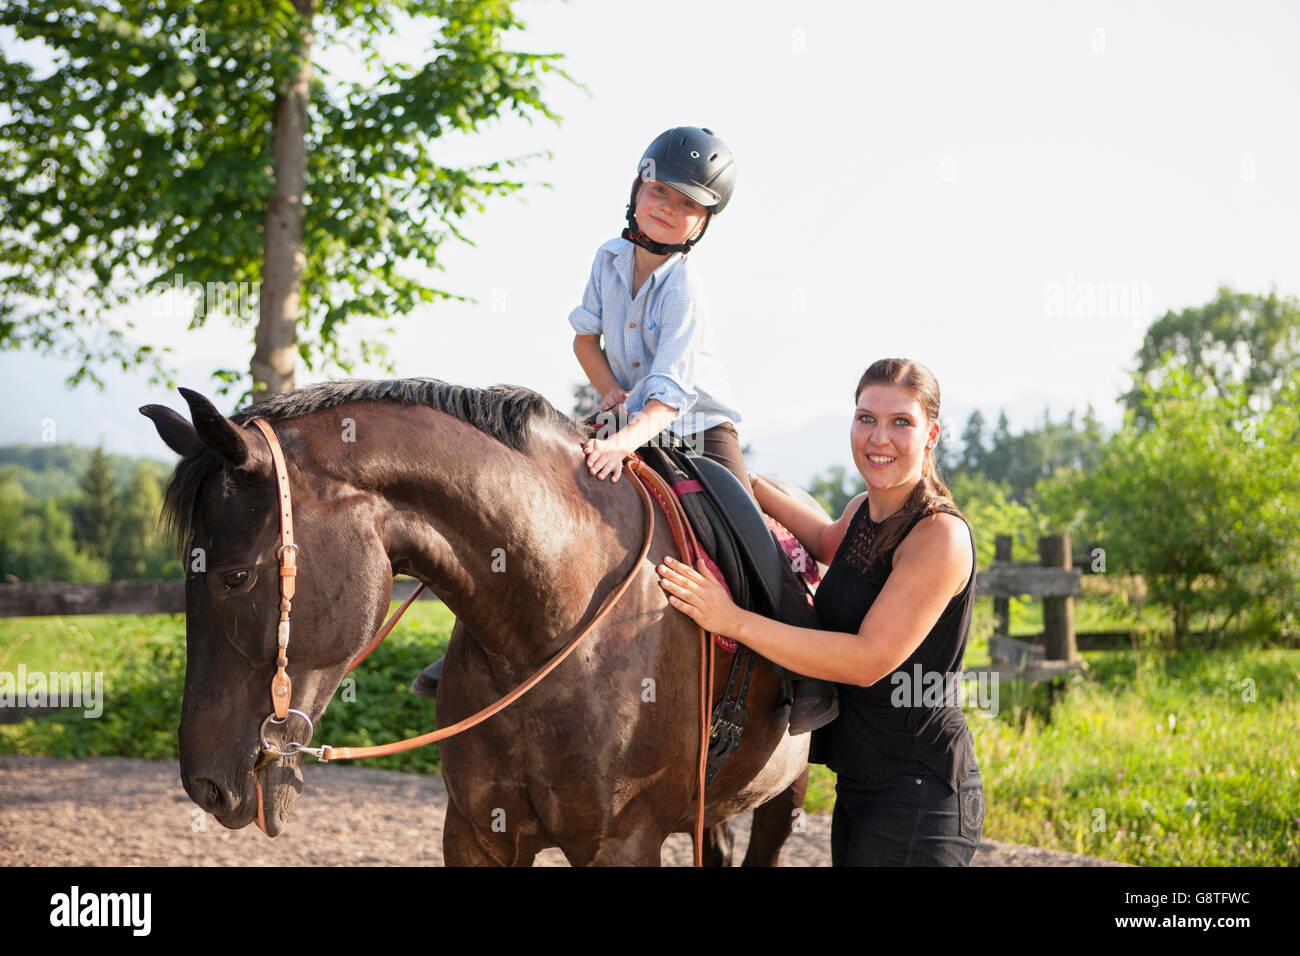 Girl learns to ride a horse with help of female instructor Stock Photo